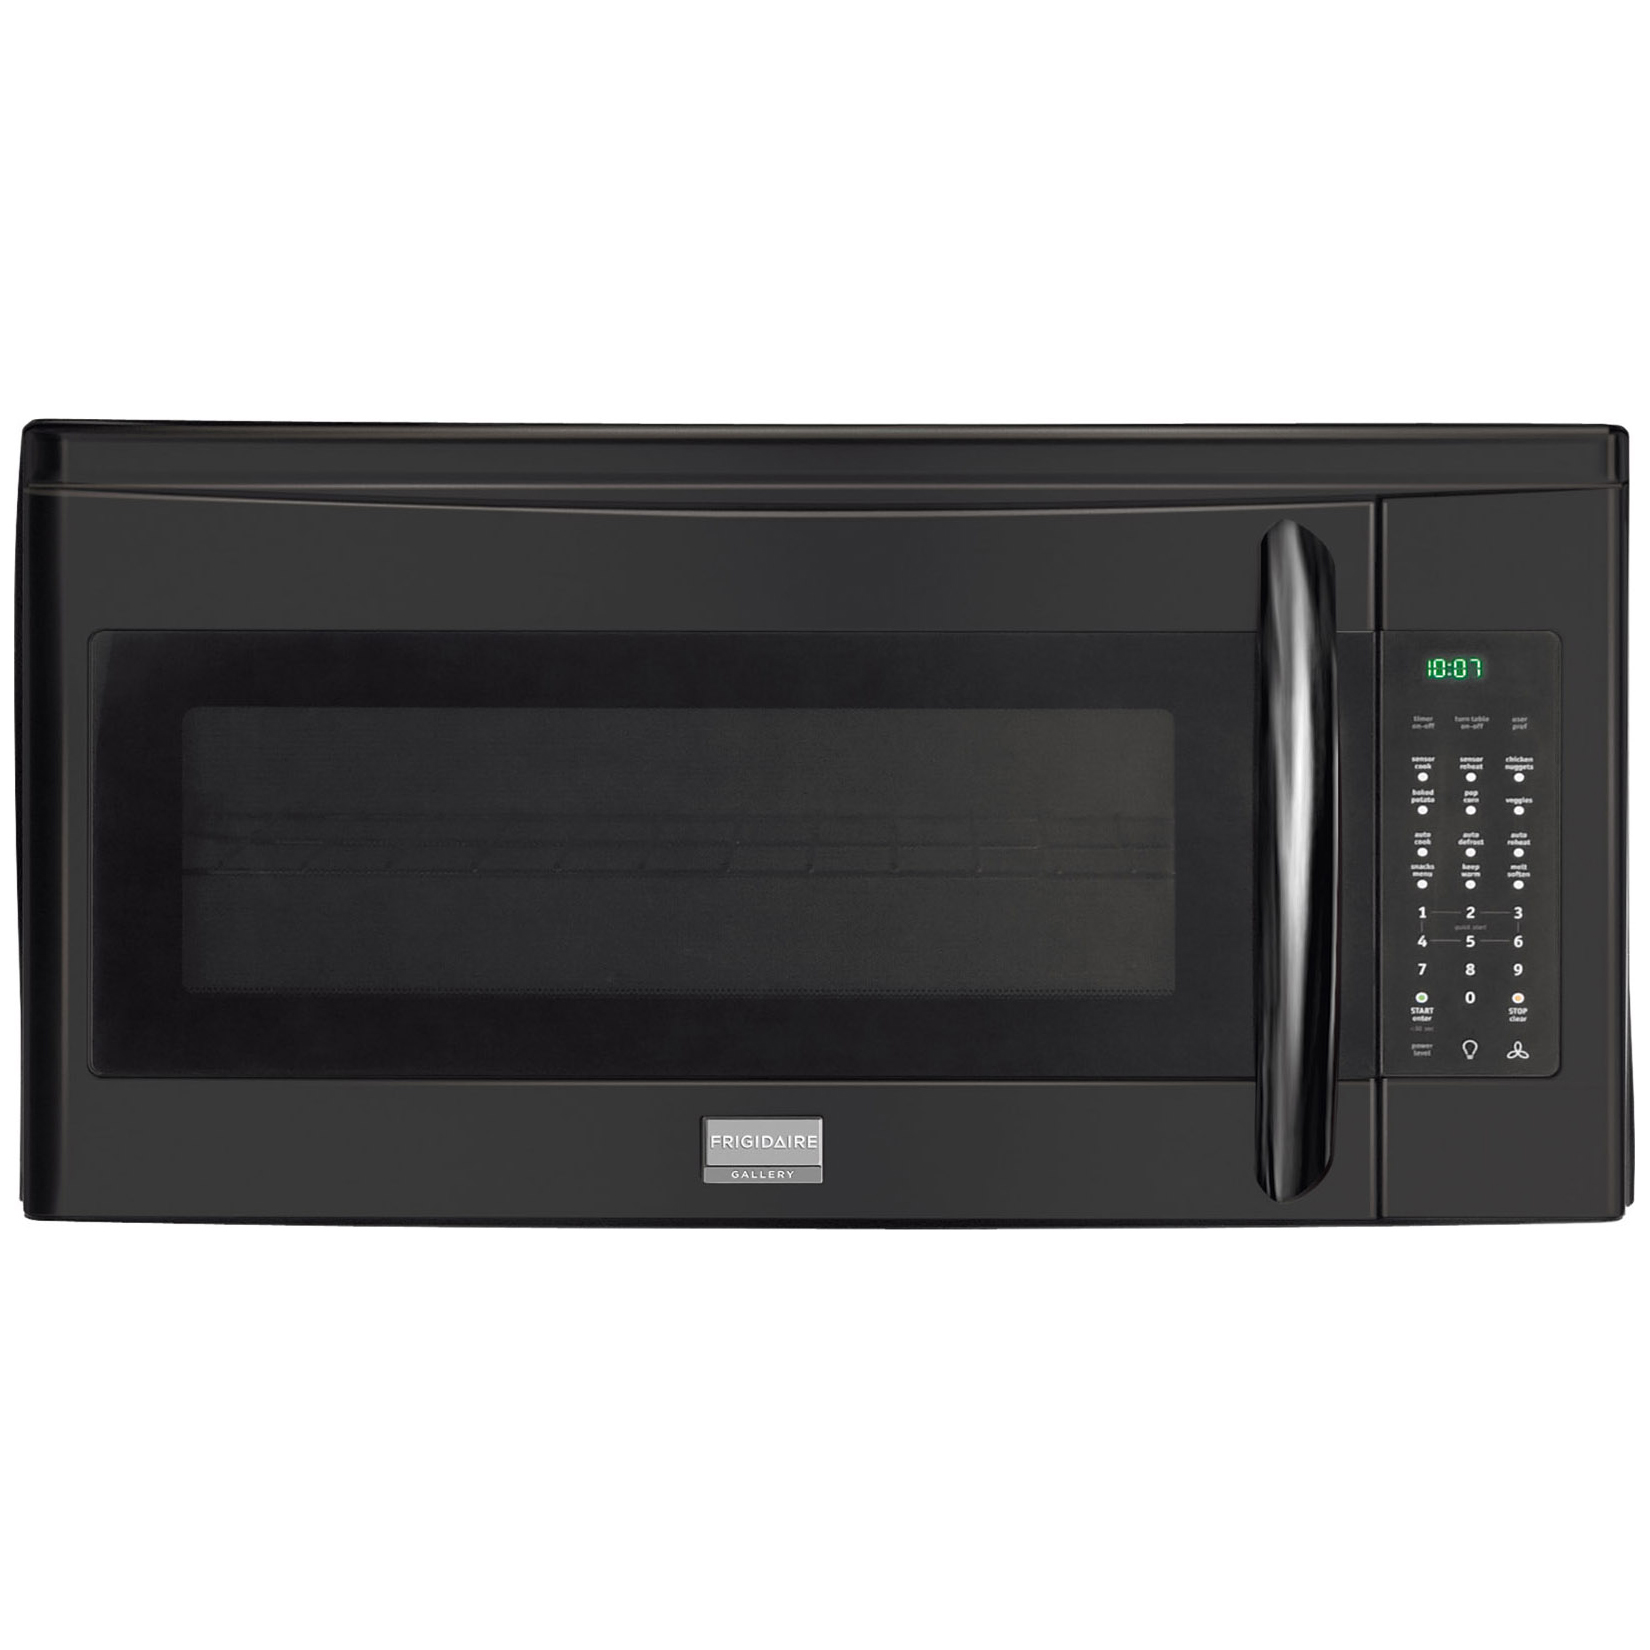 Frigidaire FGMV205KB Gallery 2.0 cu. ft. Over-the-Range Microwave - Black